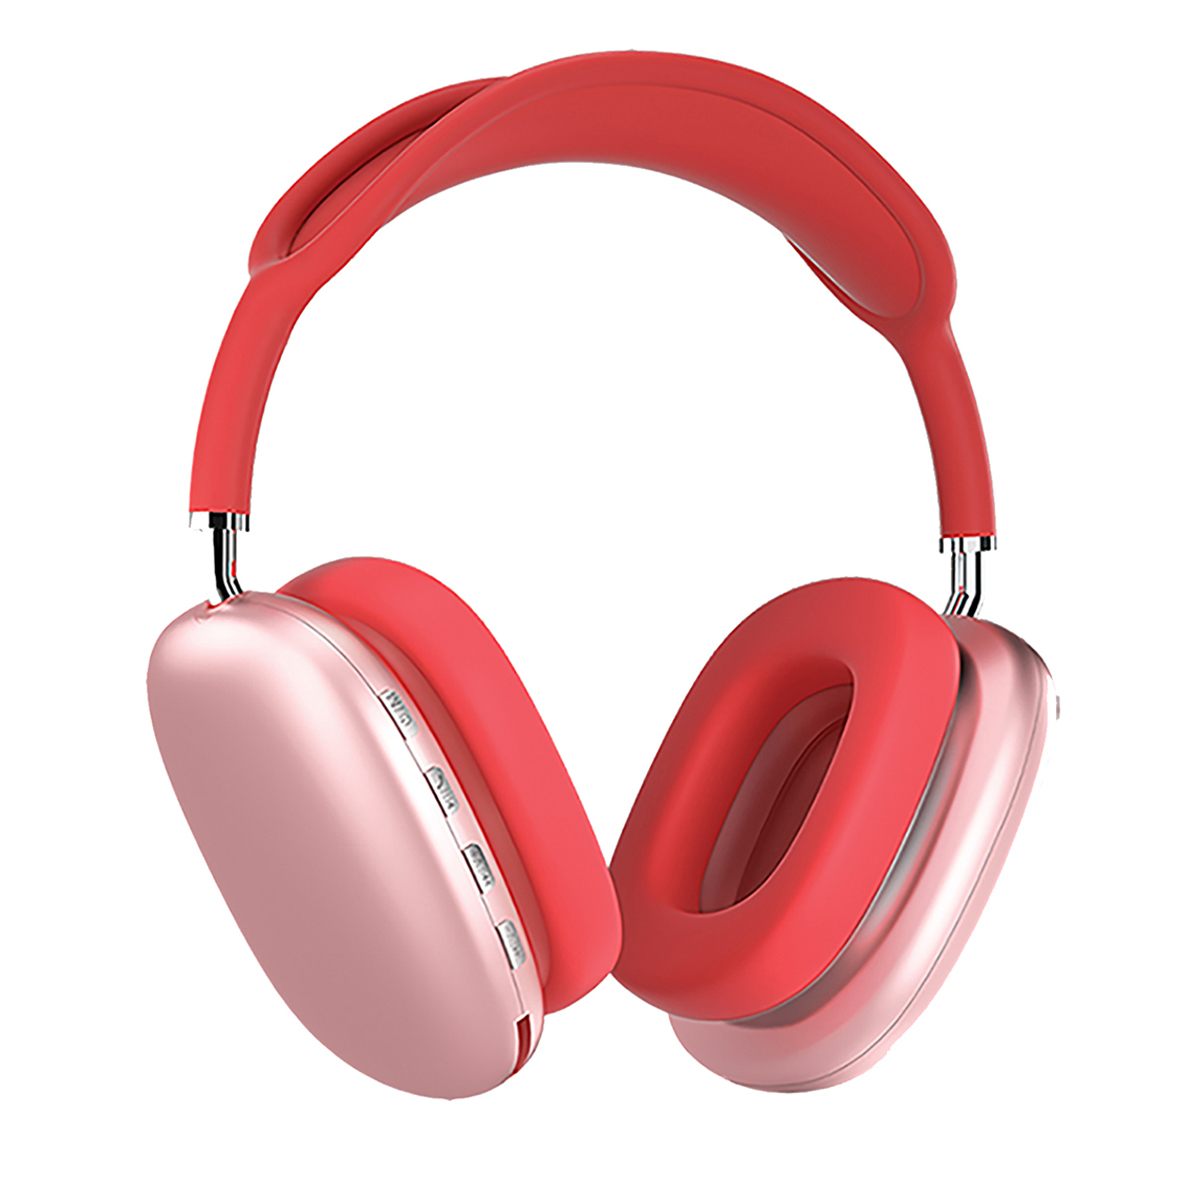 PROMATE AIRBEAT High Fidelity Stereo Wireless Headphones ( Red )